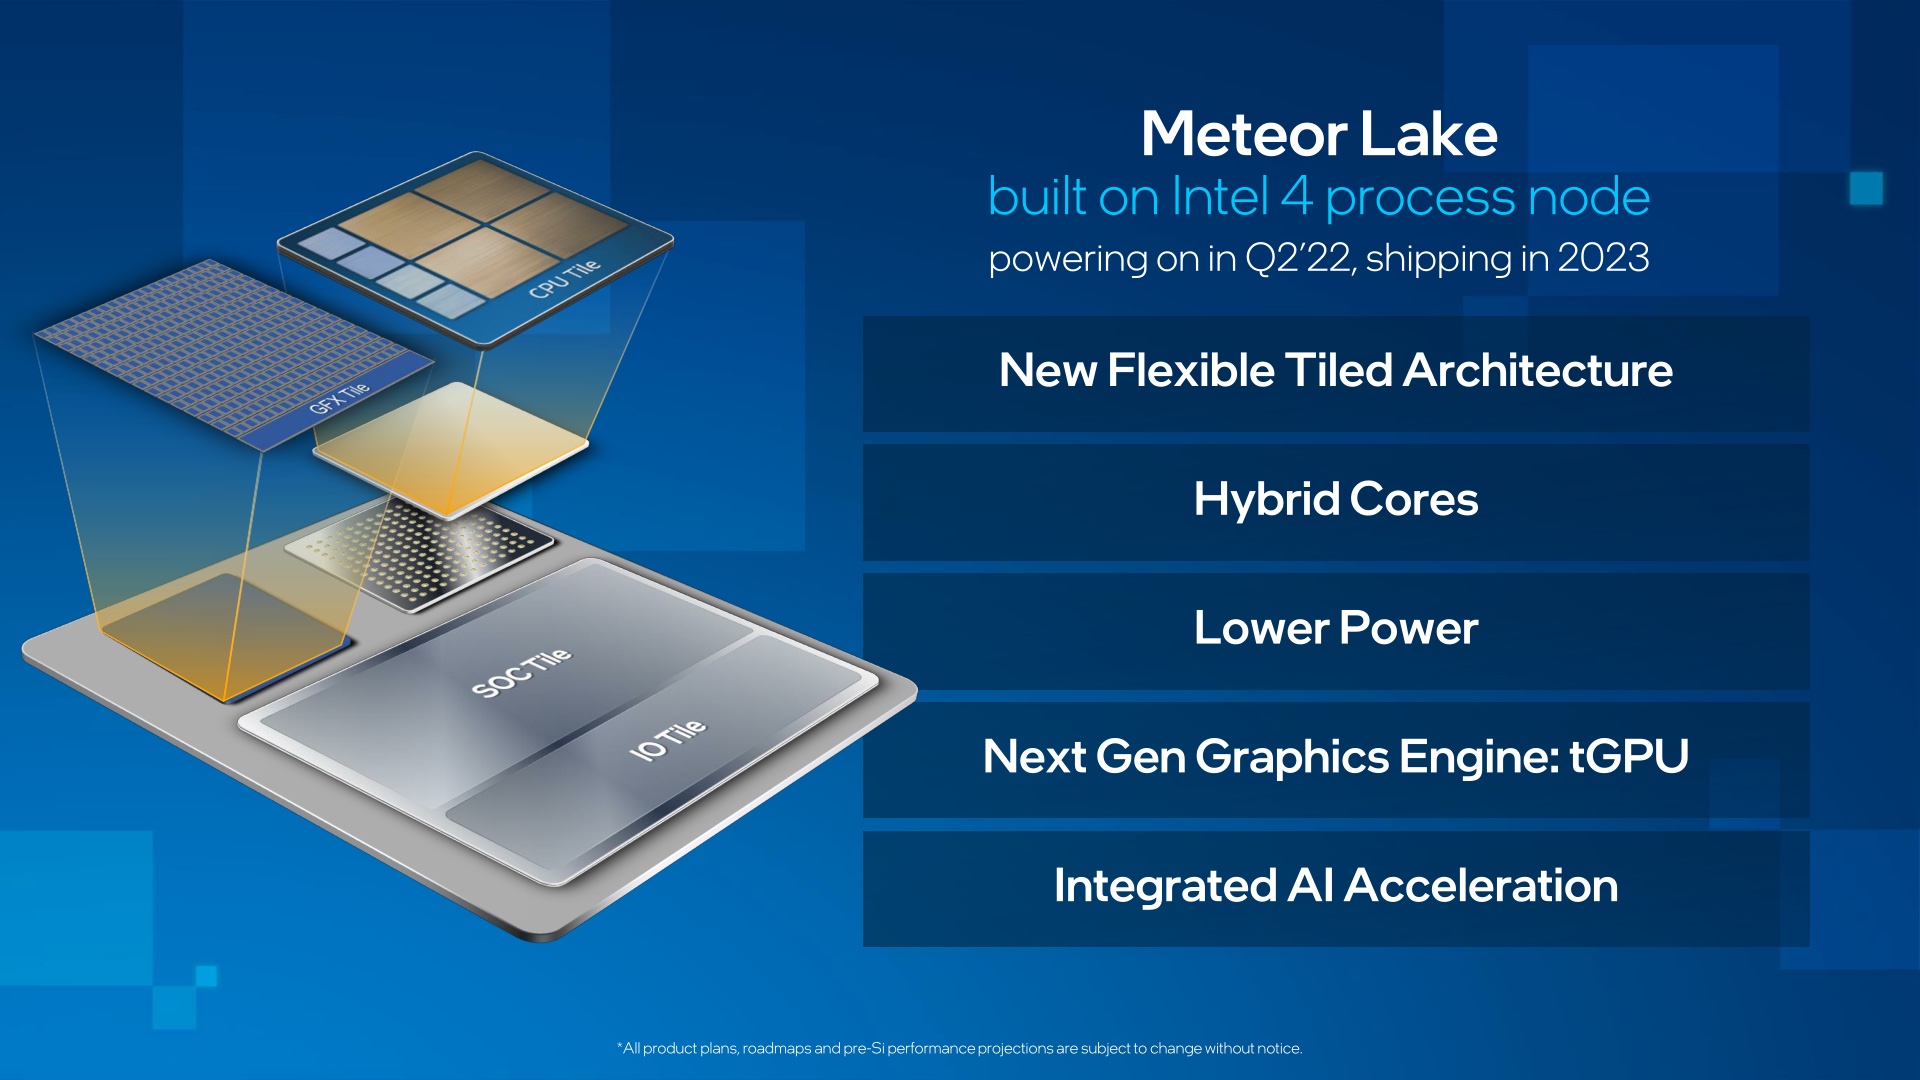 Meteor Lake will be Intel's first consumer CPU to use a chip-based approach.